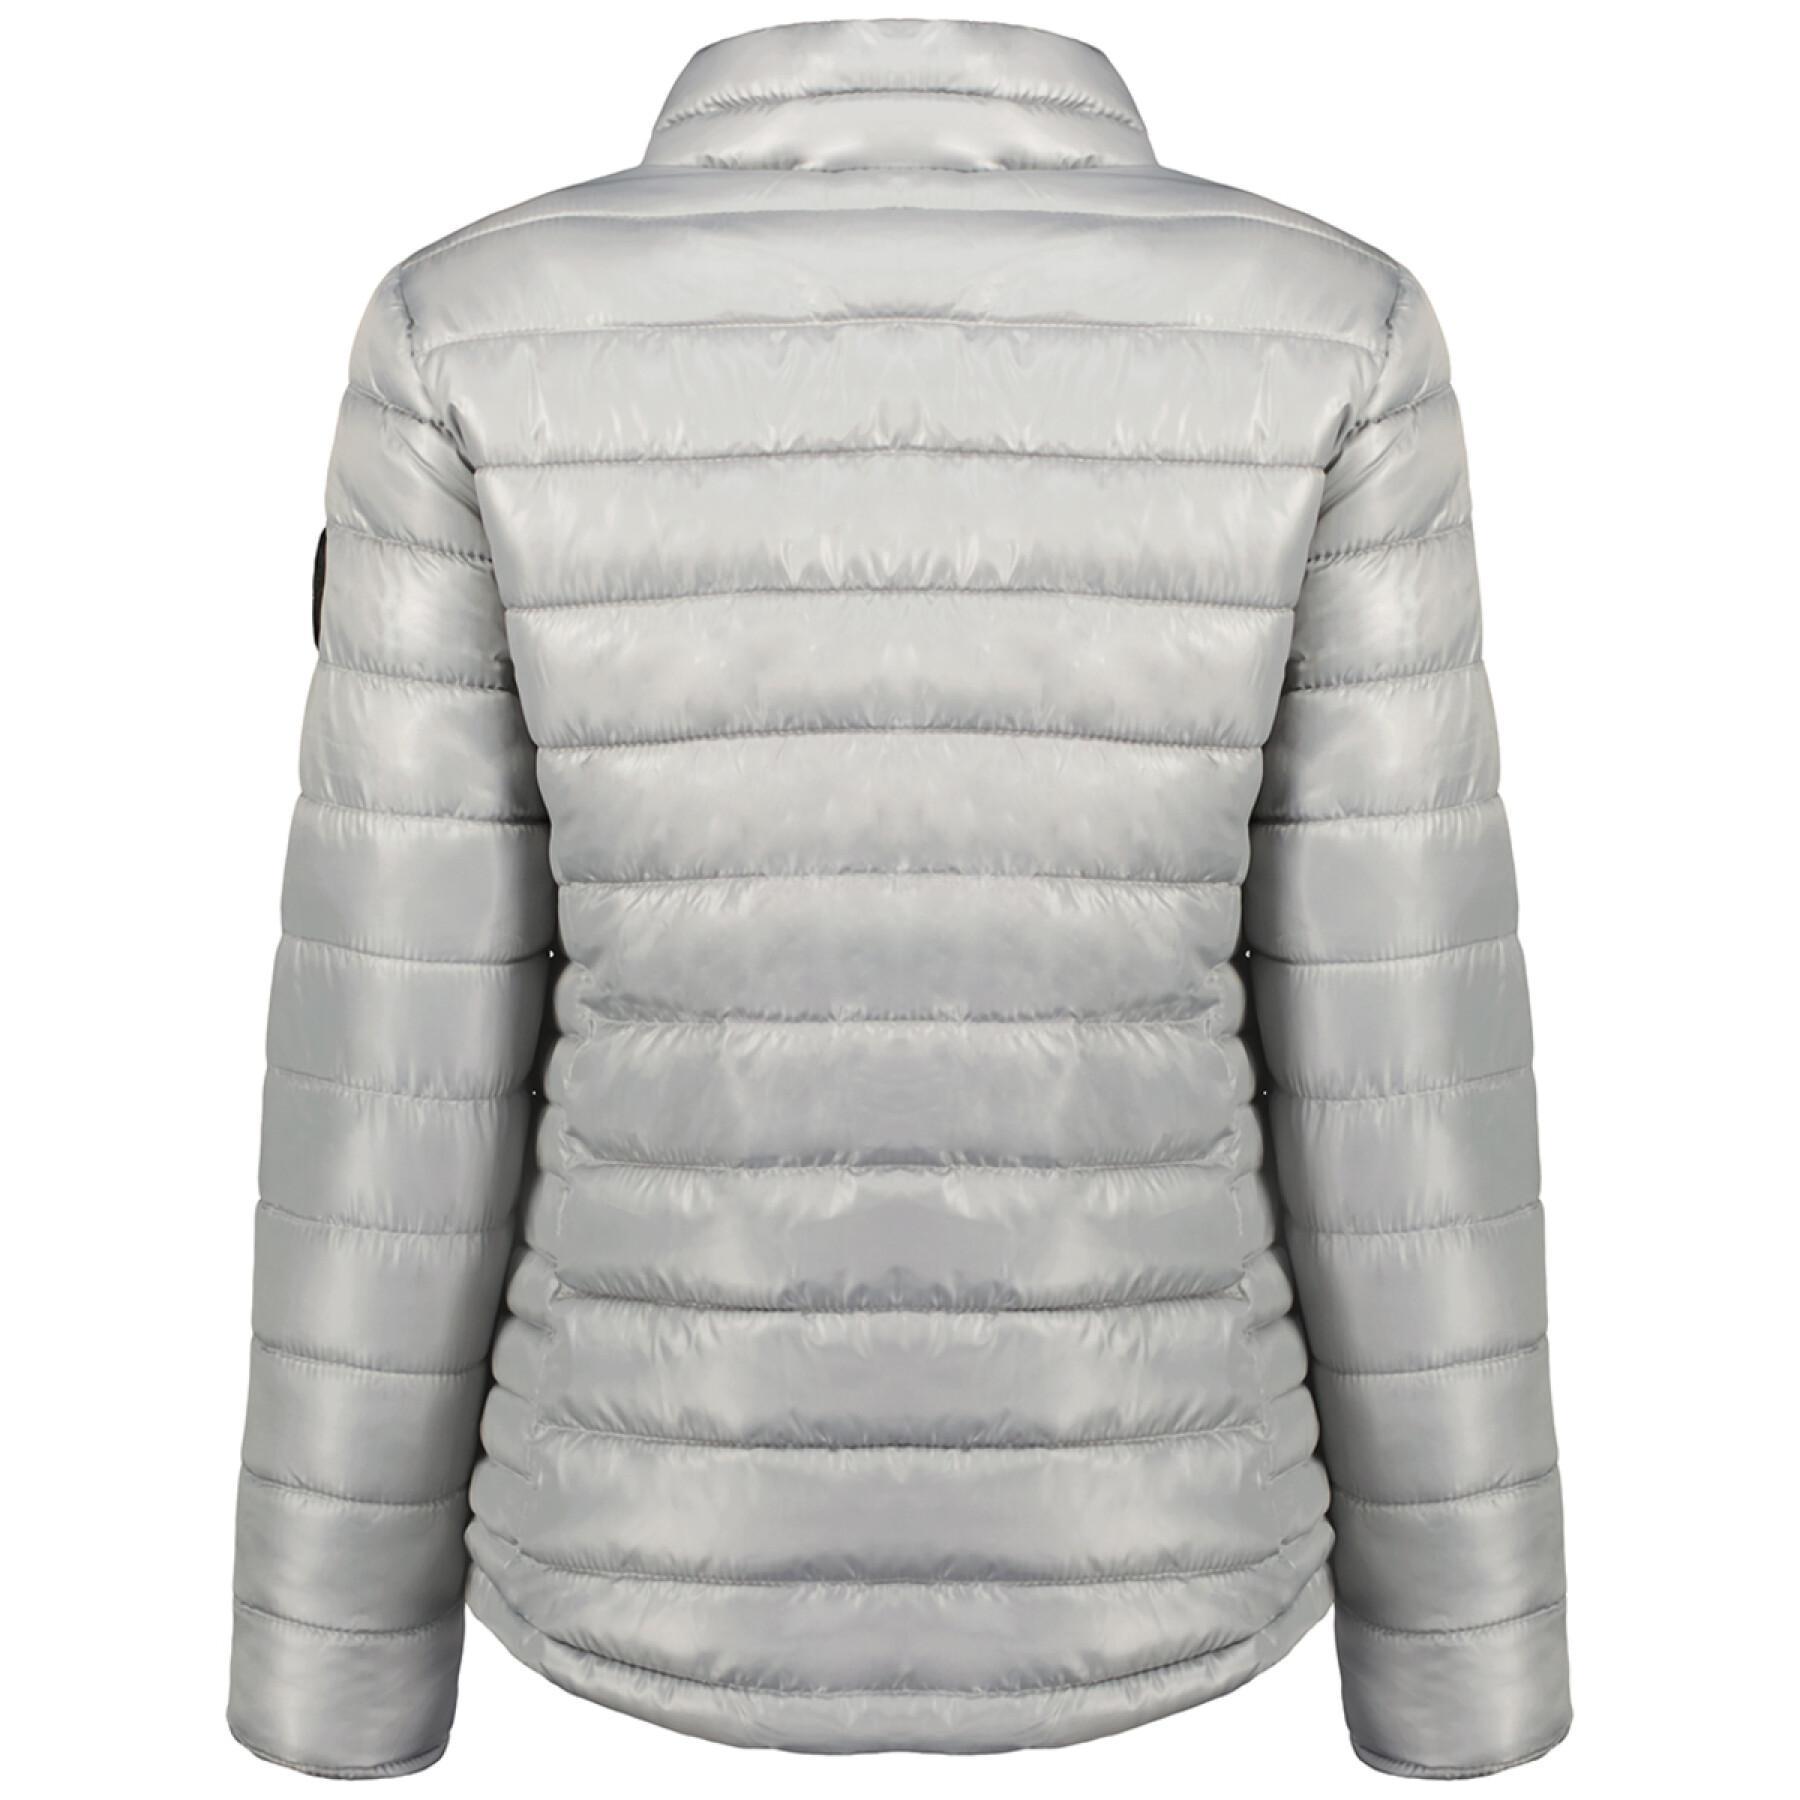 Piumino da donna Geographical Norway Annecy Basic Eo Db